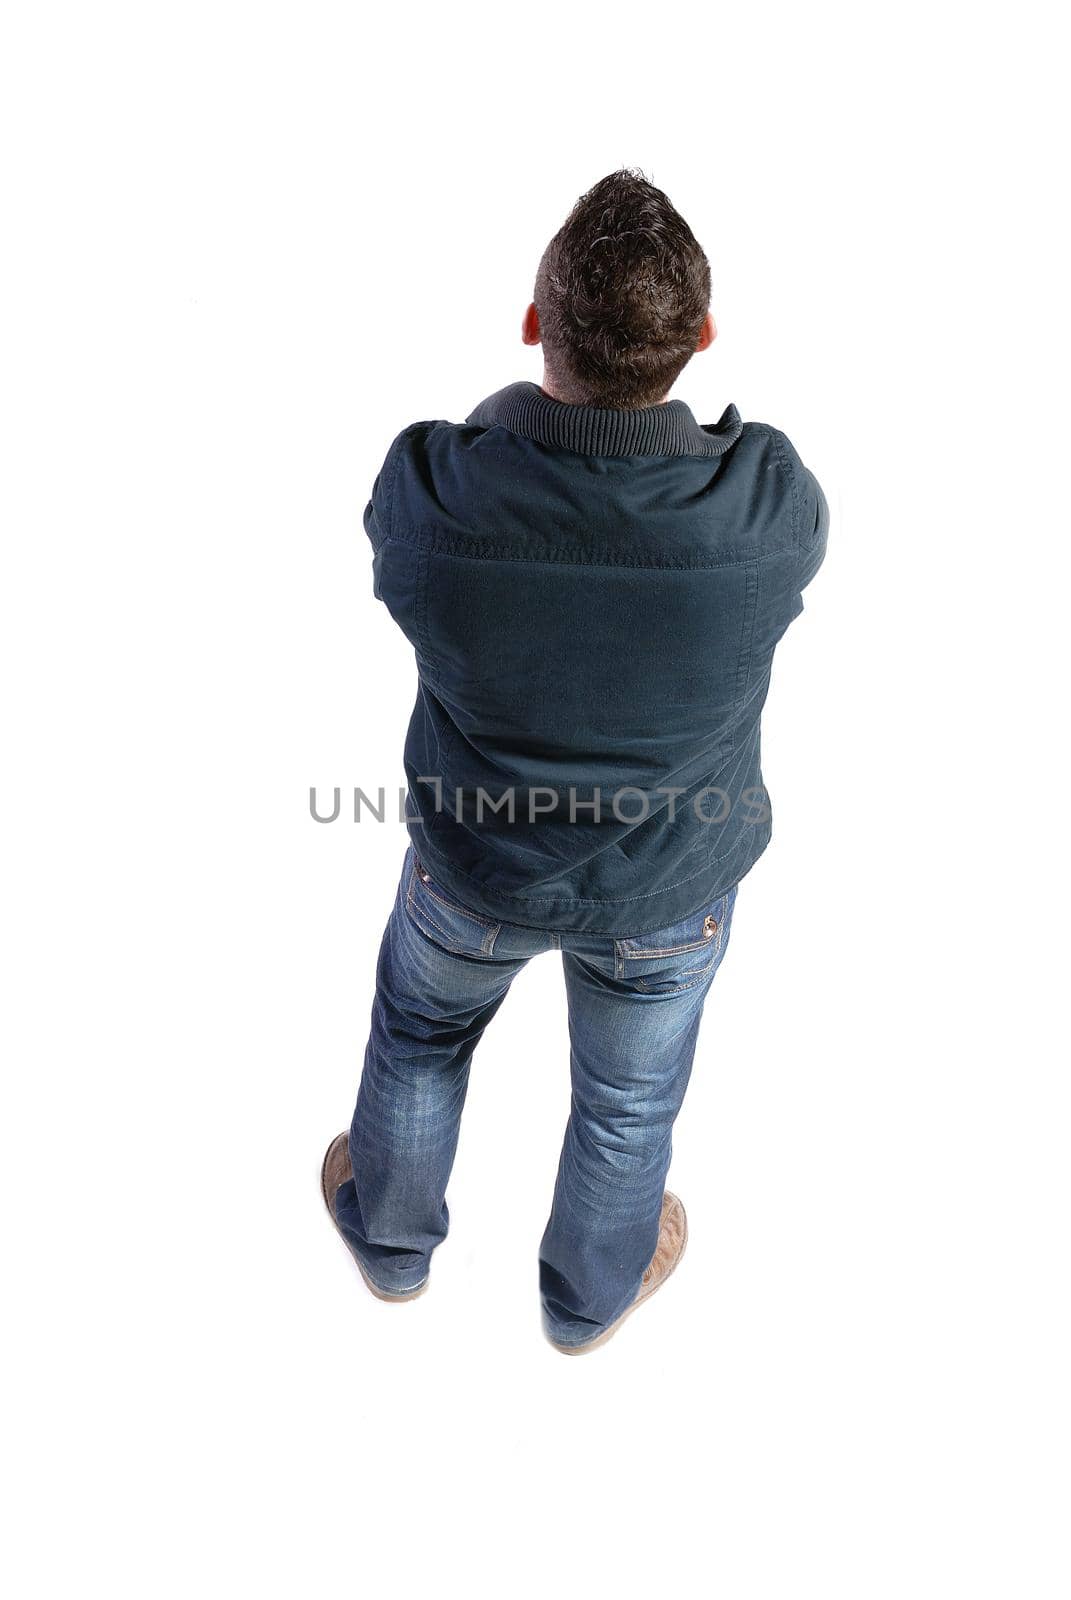 young boy in jacket isolated on white background